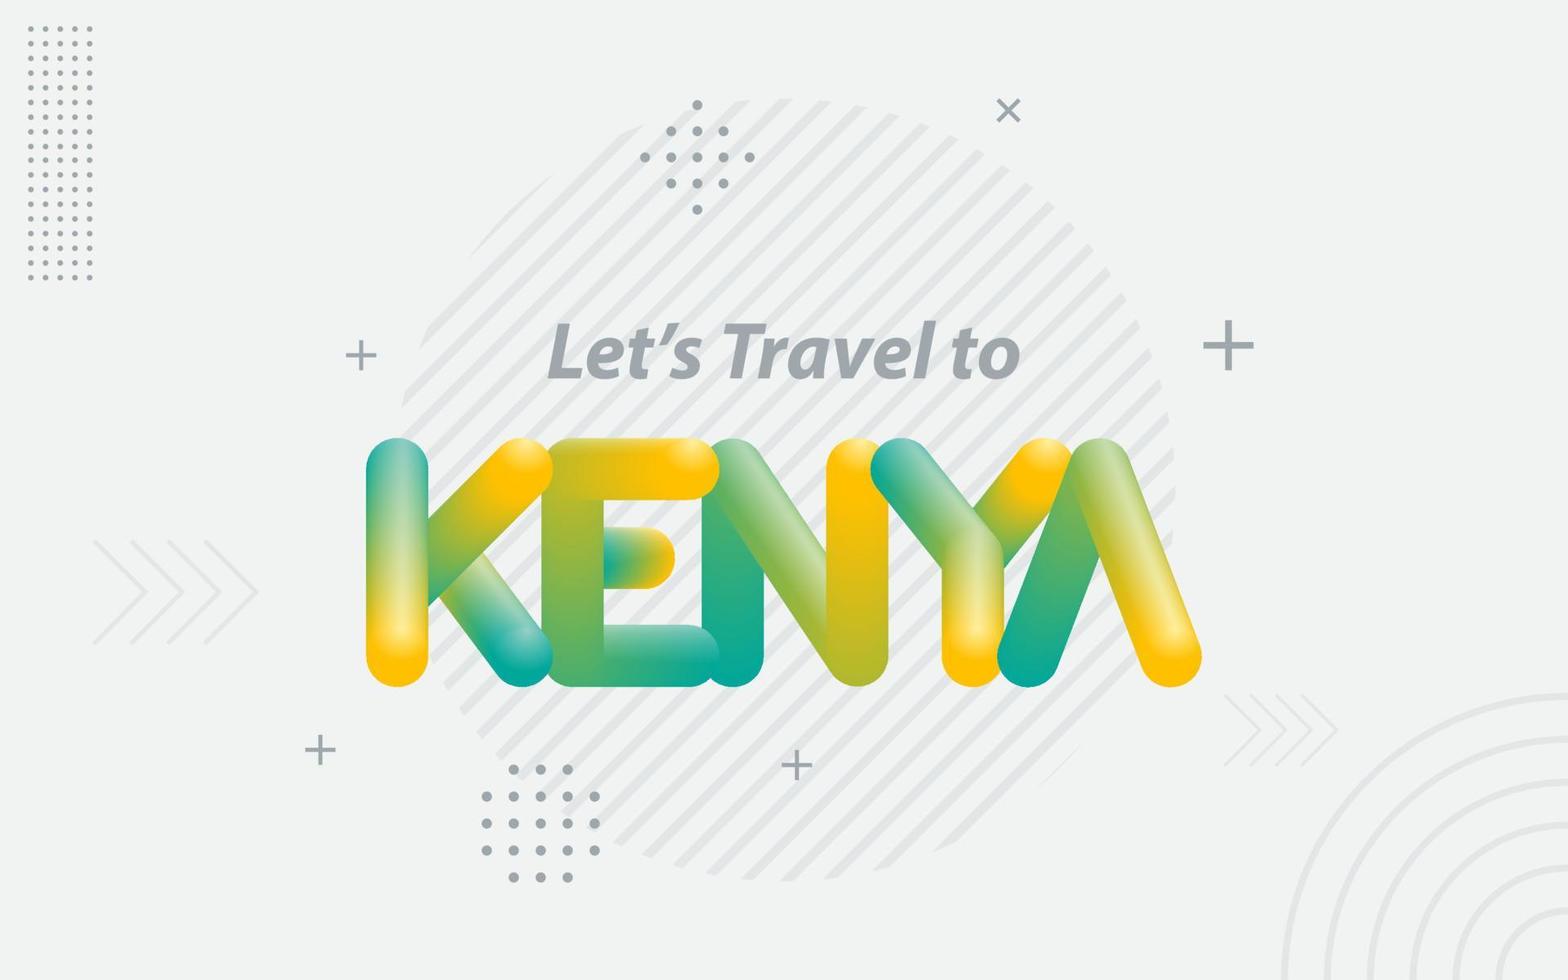 Lets Travel to Kenya. Creative Typography with 3d Blend effect vector